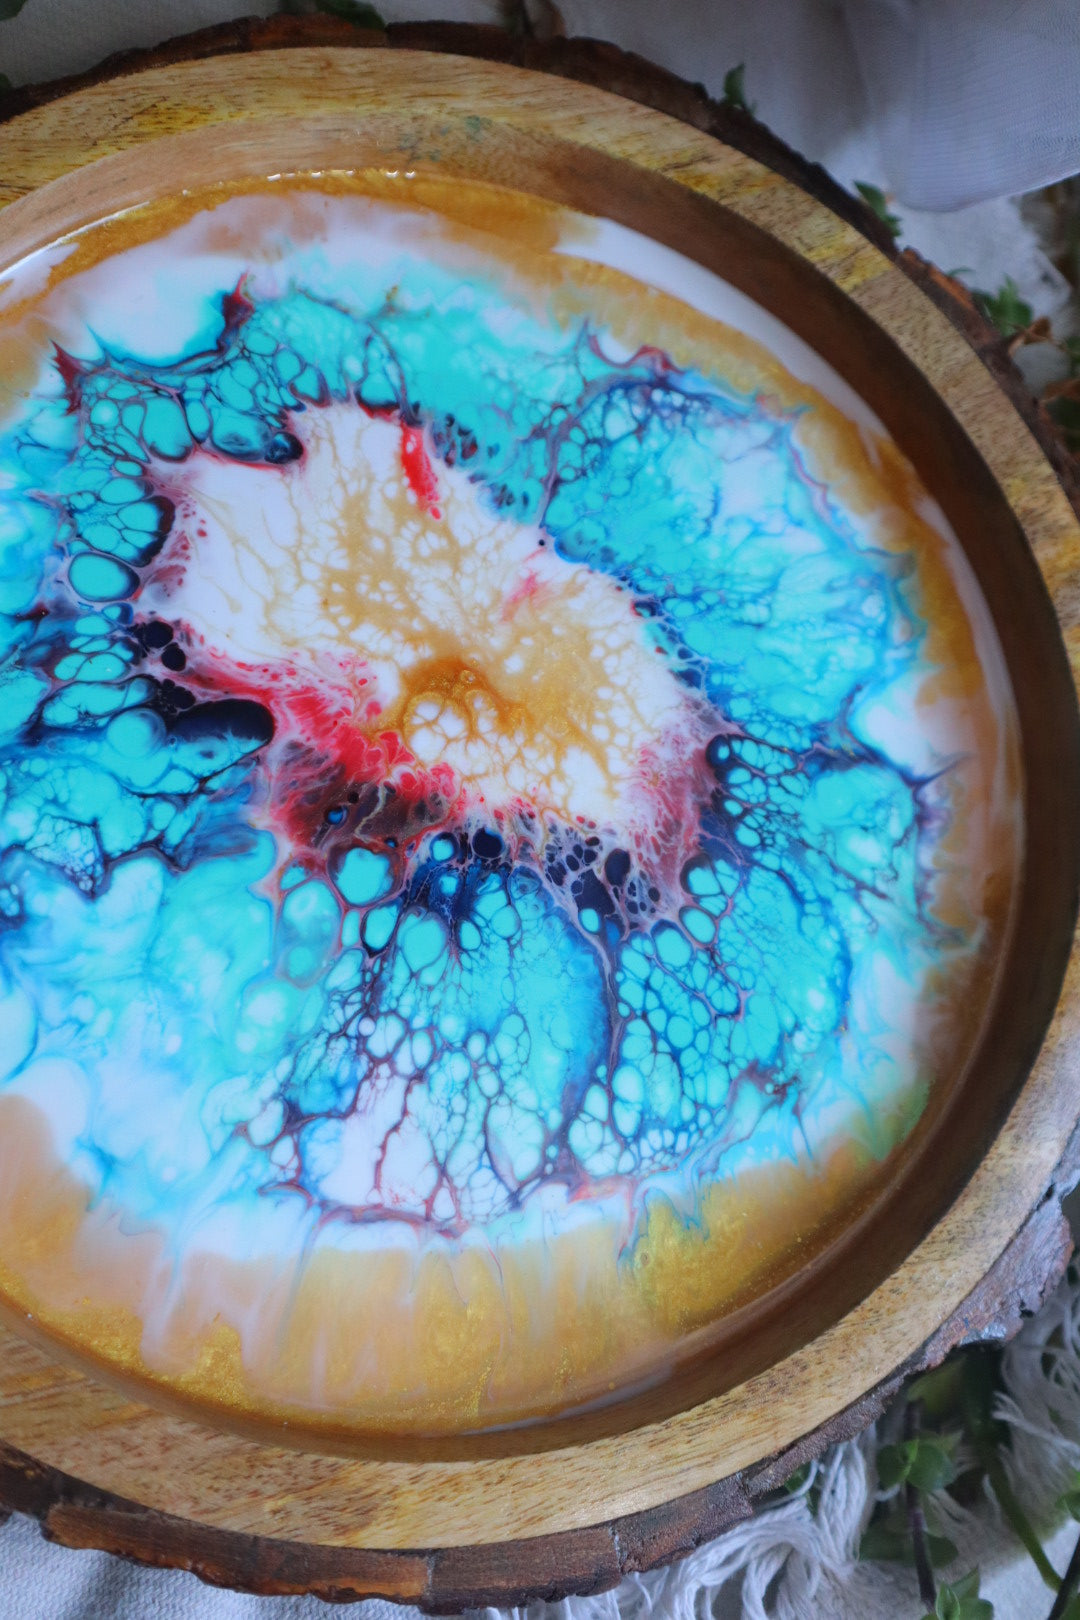 Epoxy Colorful Pattern Wooden Circular Tray | Resin Serving Tray